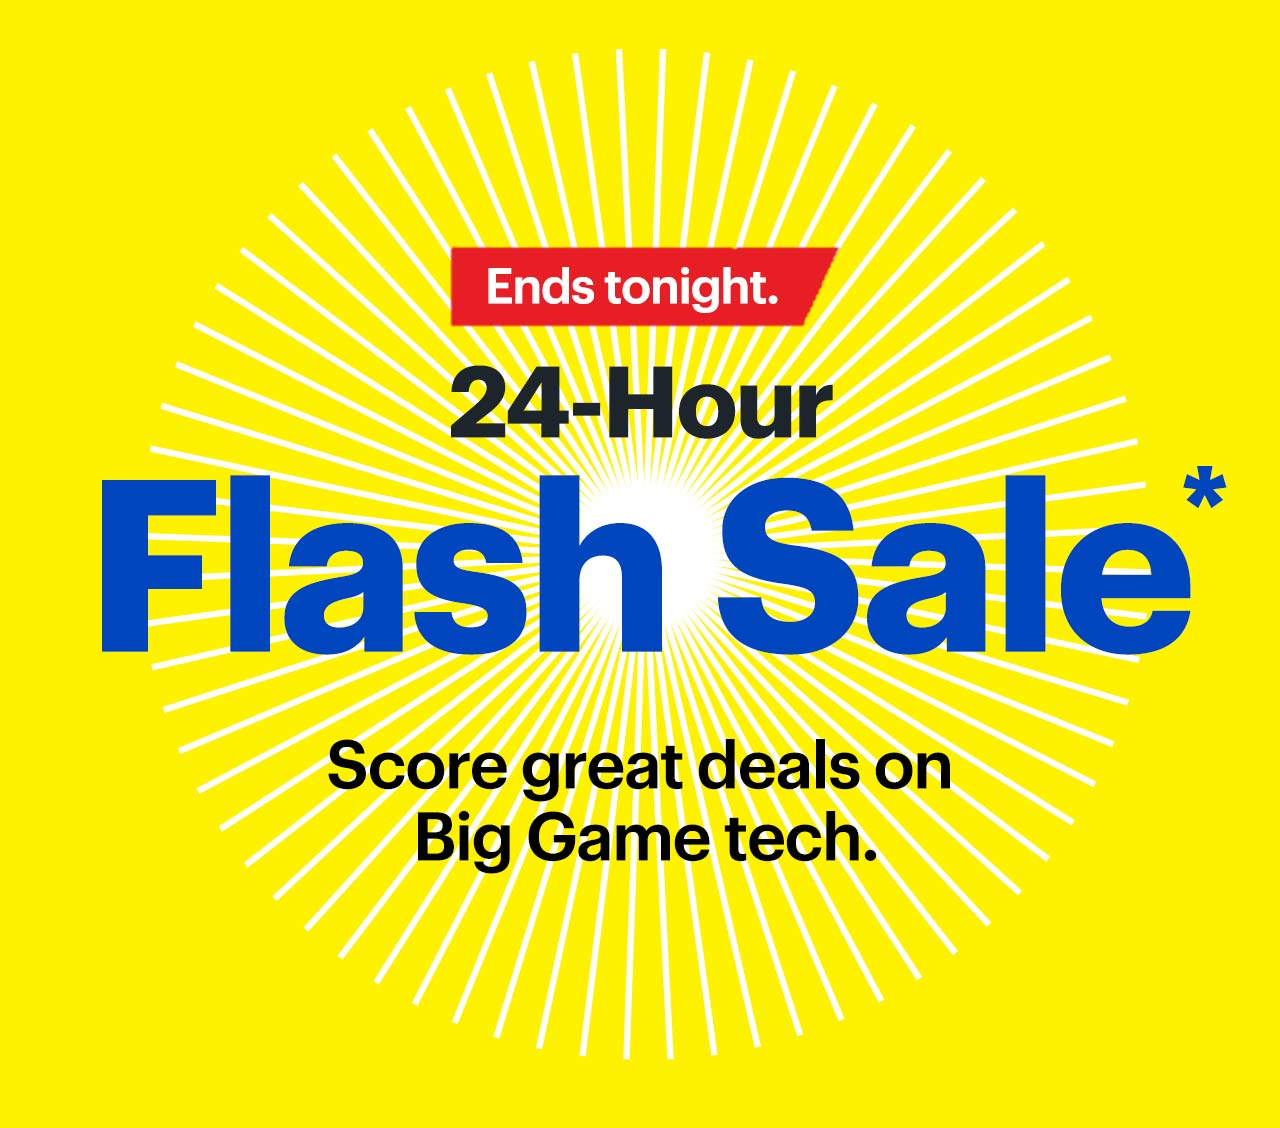 24-Hour Flash Sale. Ends tonight. Score great deals on Big Game tech. Shop now. Reference disclaimer.